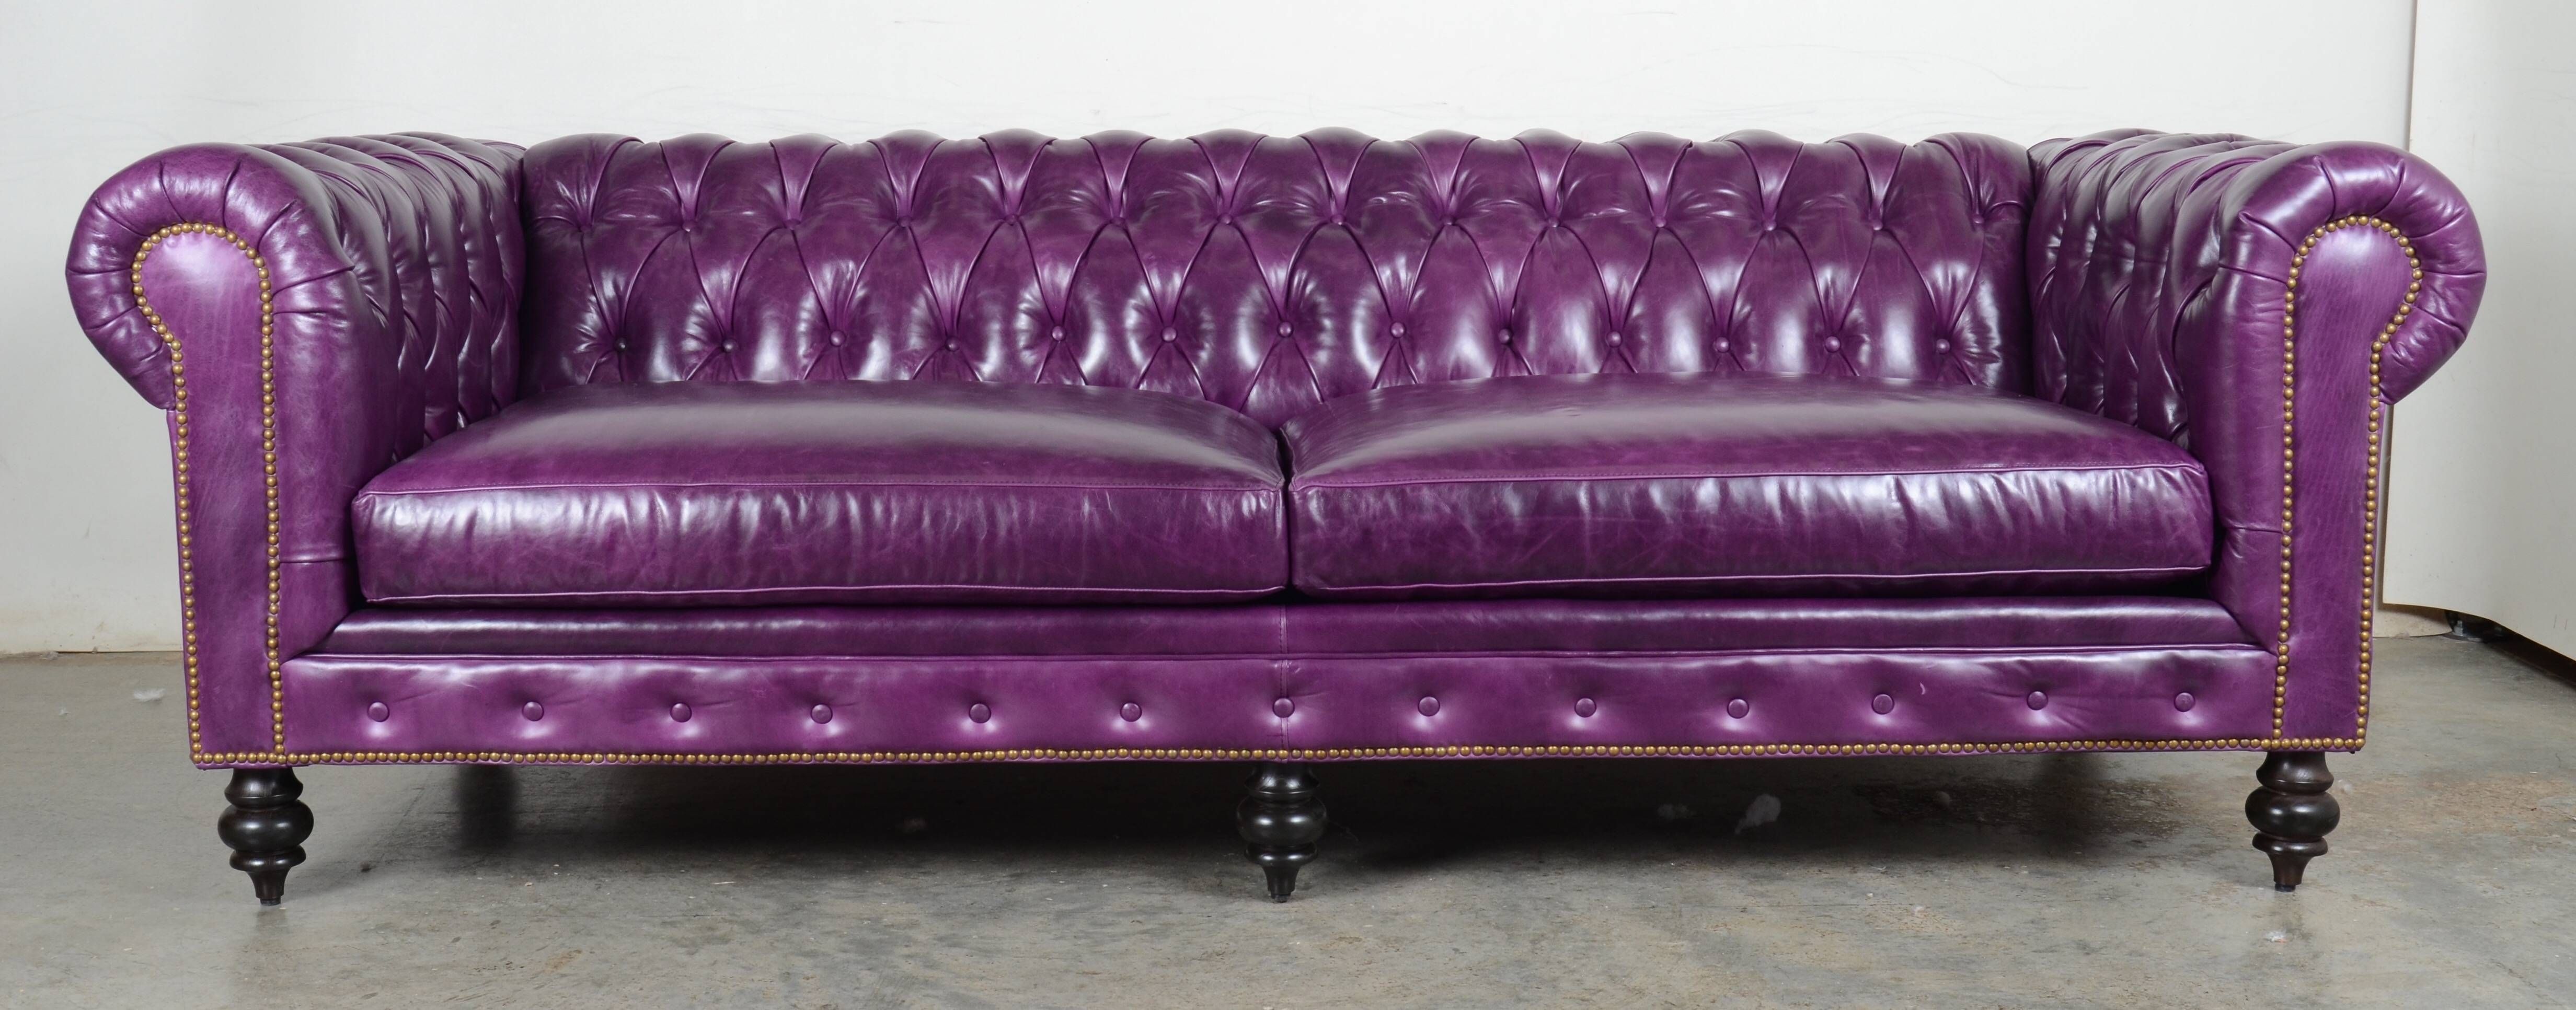 Furniture: Exquisite Comfort With Leather Tufted Sofa In Overstuffed Sofas And Chairs (View 11 of 15)